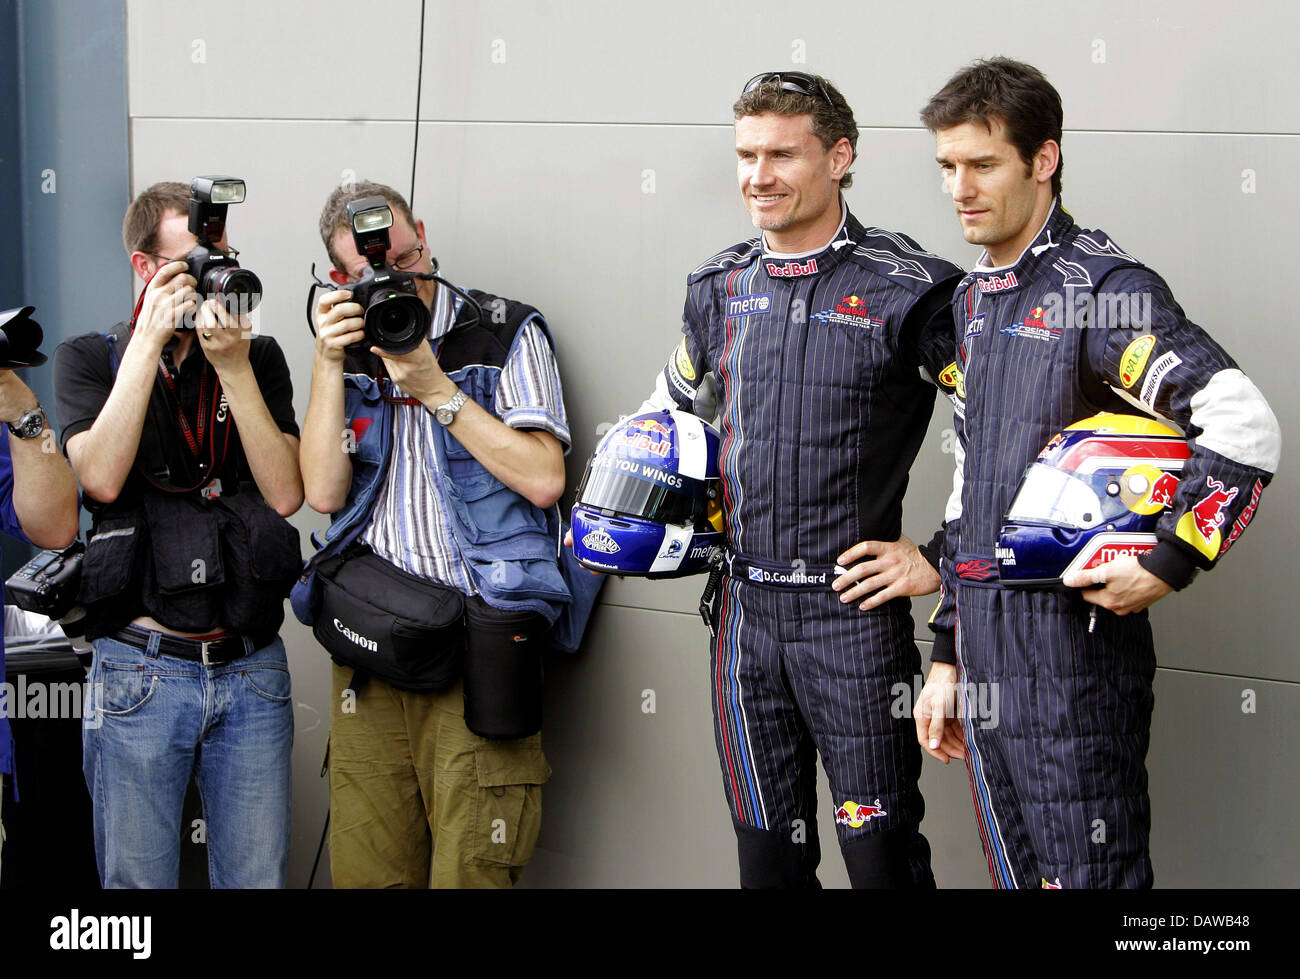 Formula One pilots, Red Bull Racing team-mates British David Coulthard (2ndR) and Australian Mark Webber (R) pose for the cameras at the official photo session to the 2007 Formula 1 Australian Grand Prix at the Albert Park race track in Melbourne, Australia, Thursday 15 March 2007. he first Grand Prix of the 2007 Formula 1 season will take place in Melbourne on Sunday 18 March. Pho Stock Photo